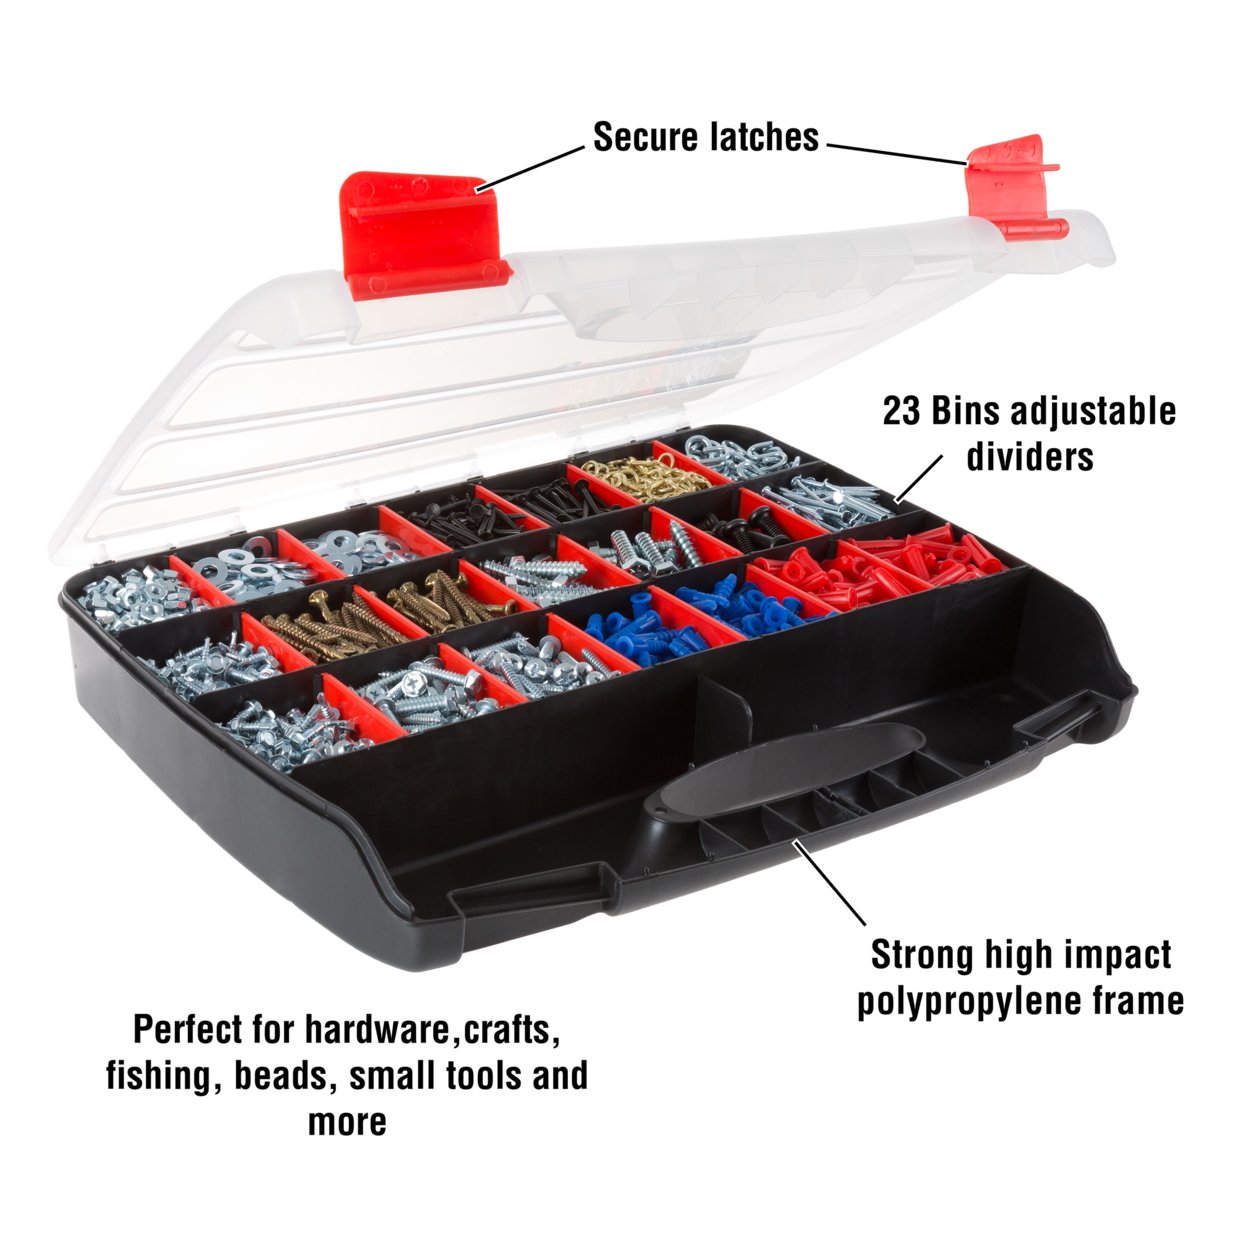 Portable Storage Case With Secure Locks And 21 Adjustable Compartments Crafts